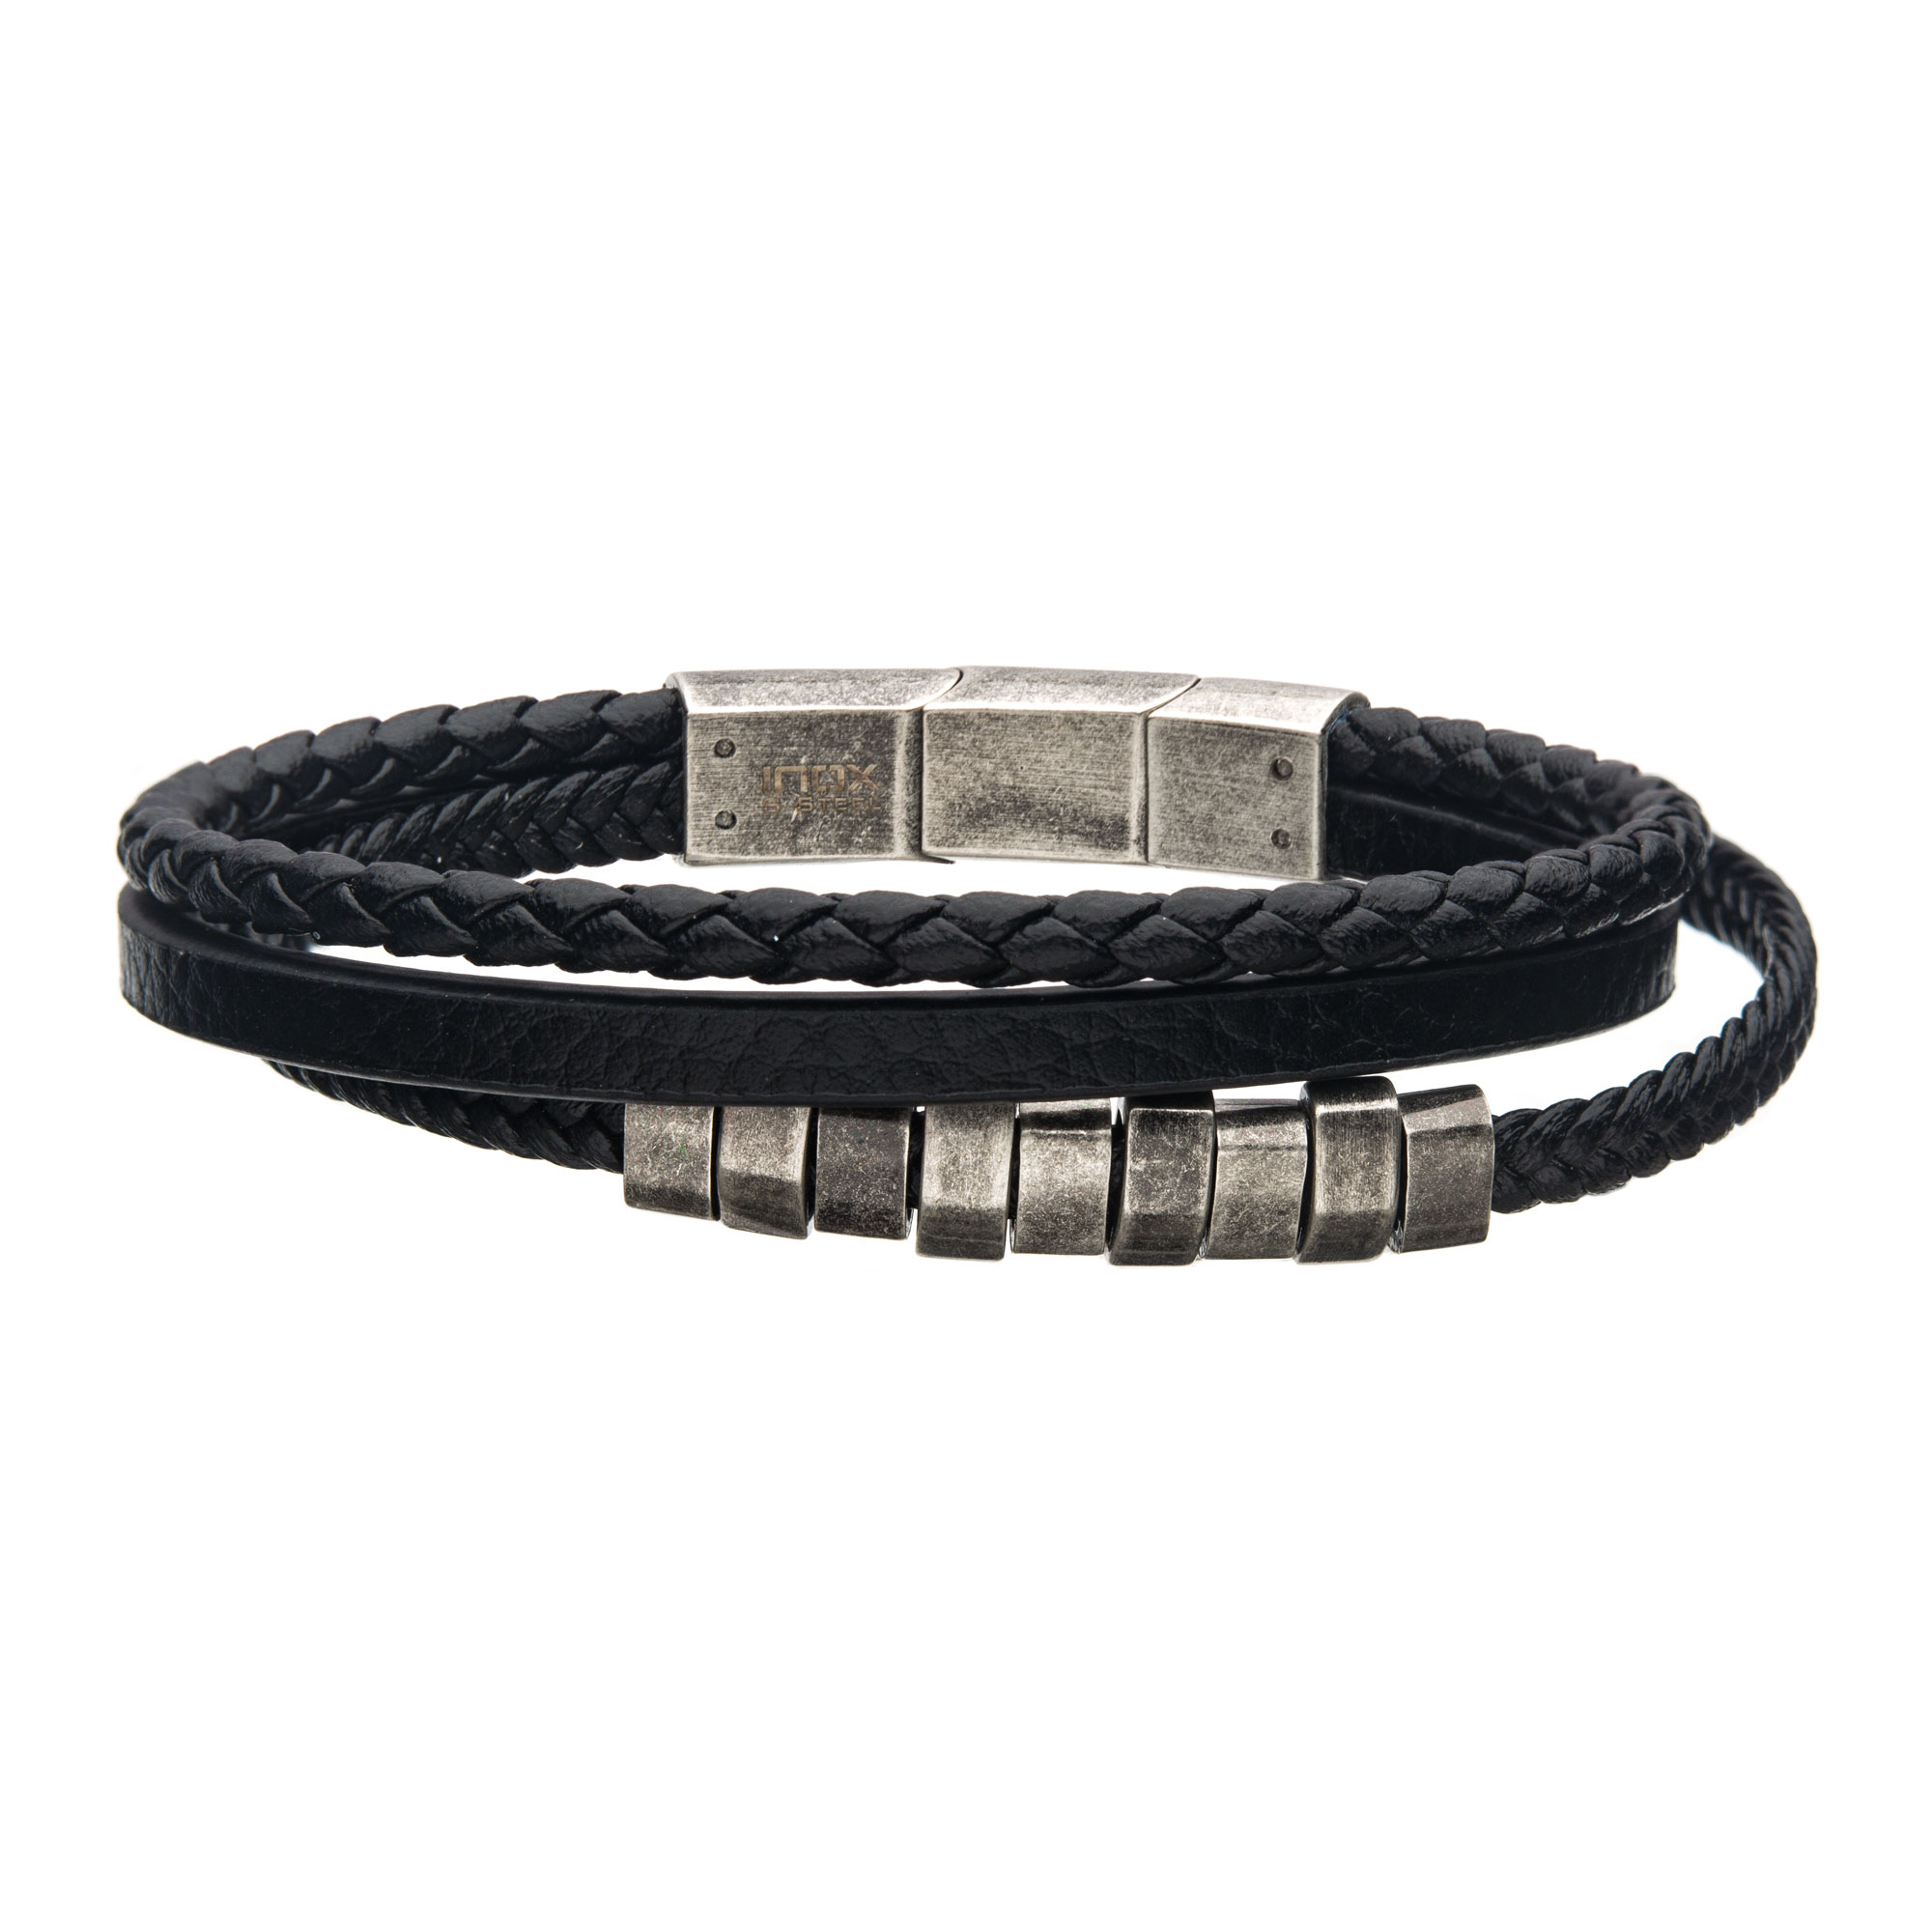 Black Braided Multi Leather with Antiqued Steel Beads Bracelet Lewis Jewelers, Inc. Ansonia, CT